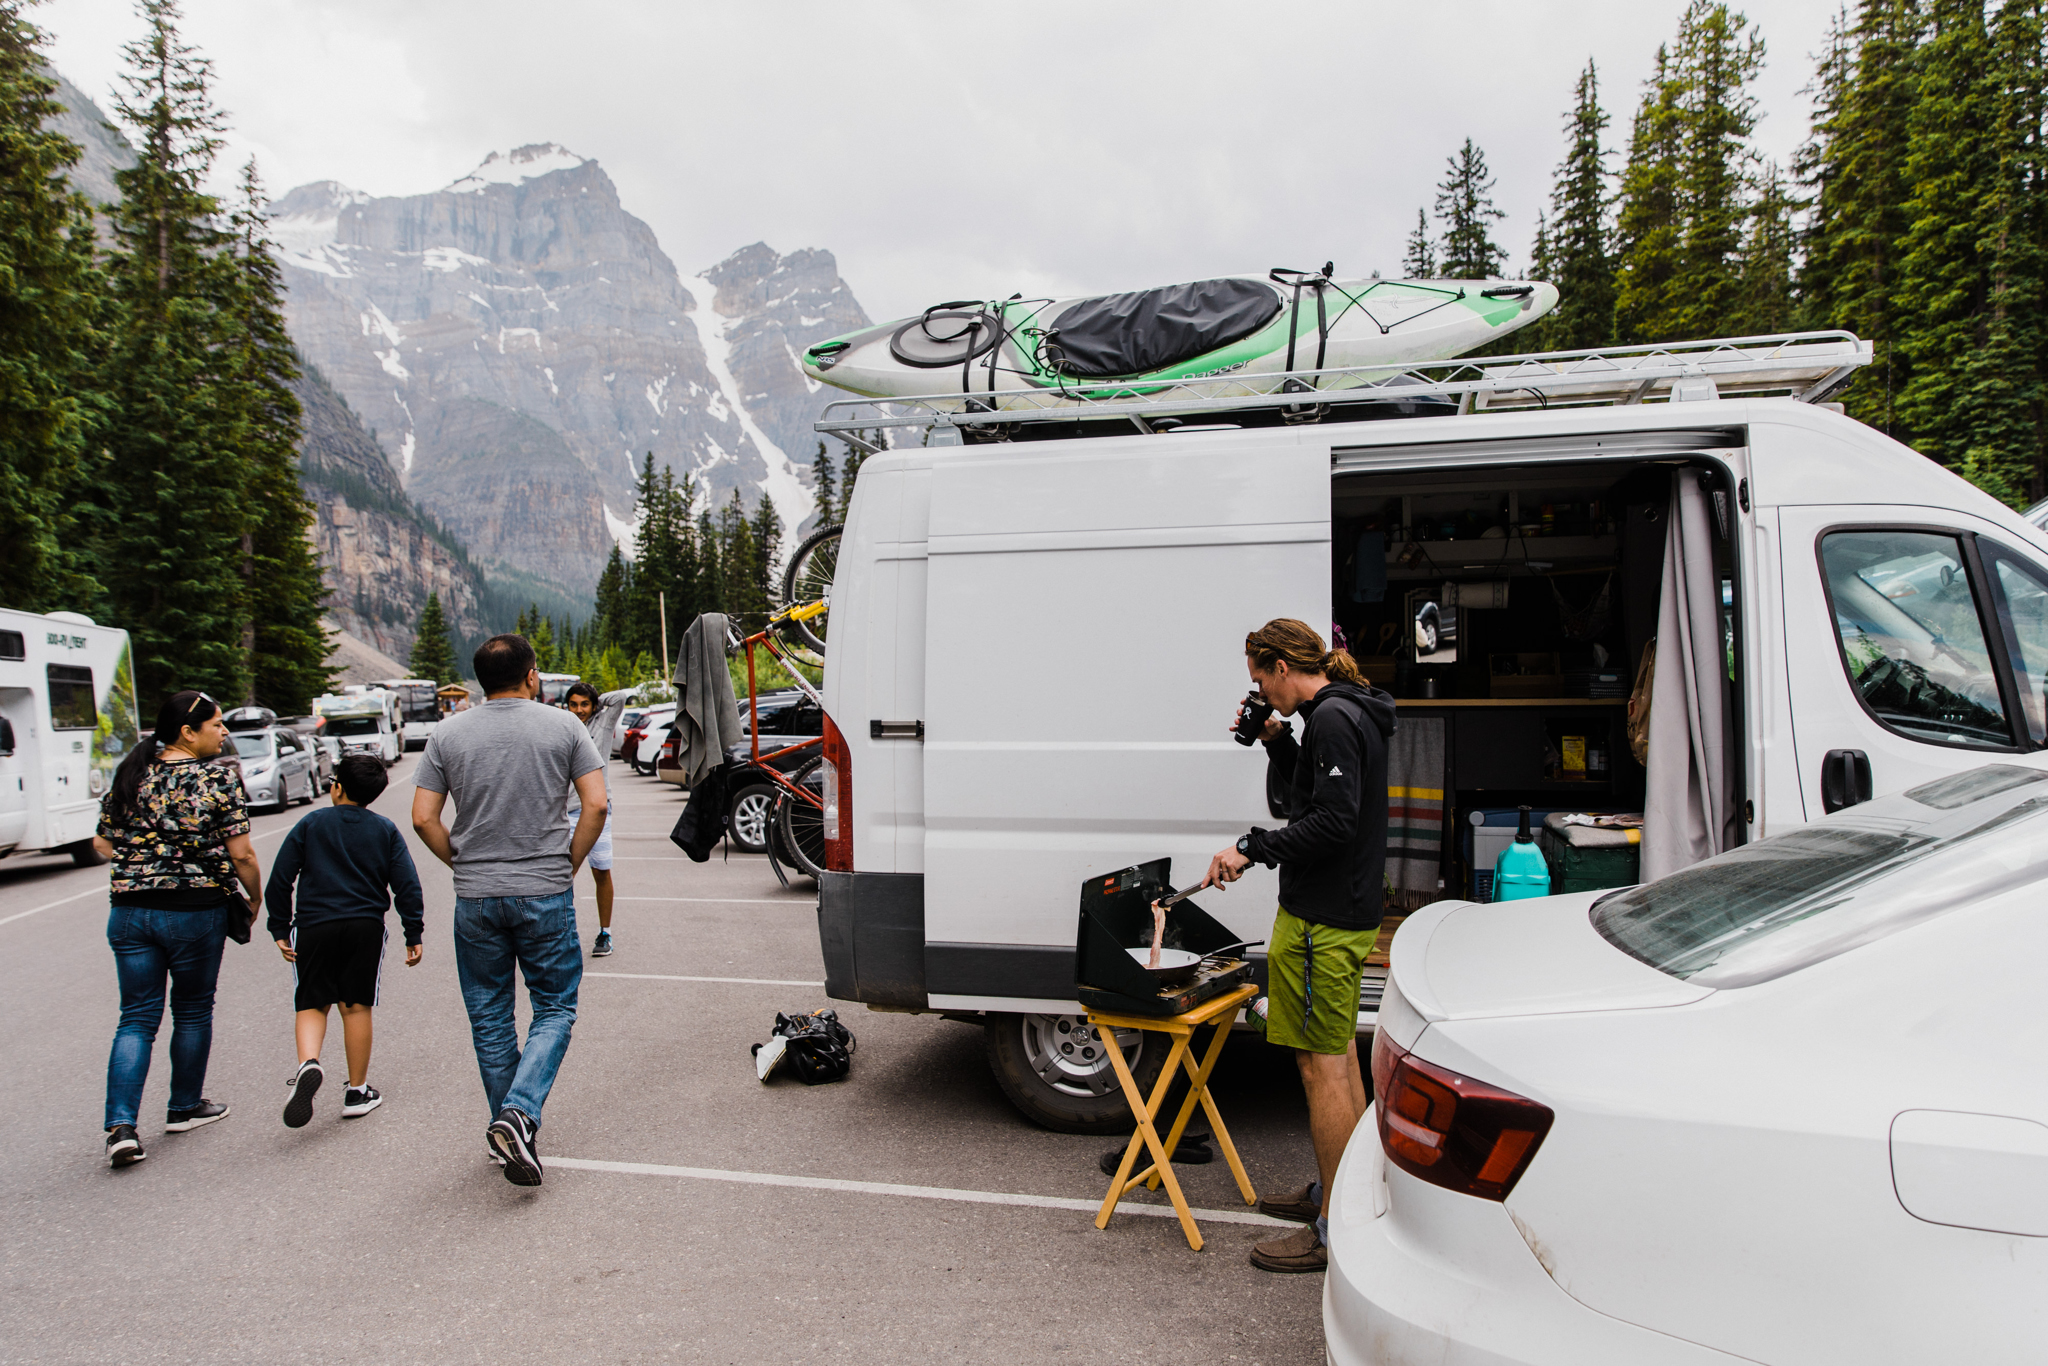 vanlife in canada | utah and california adventure elopement photographers | the hearnes adventure photography | www.thehearnes.com